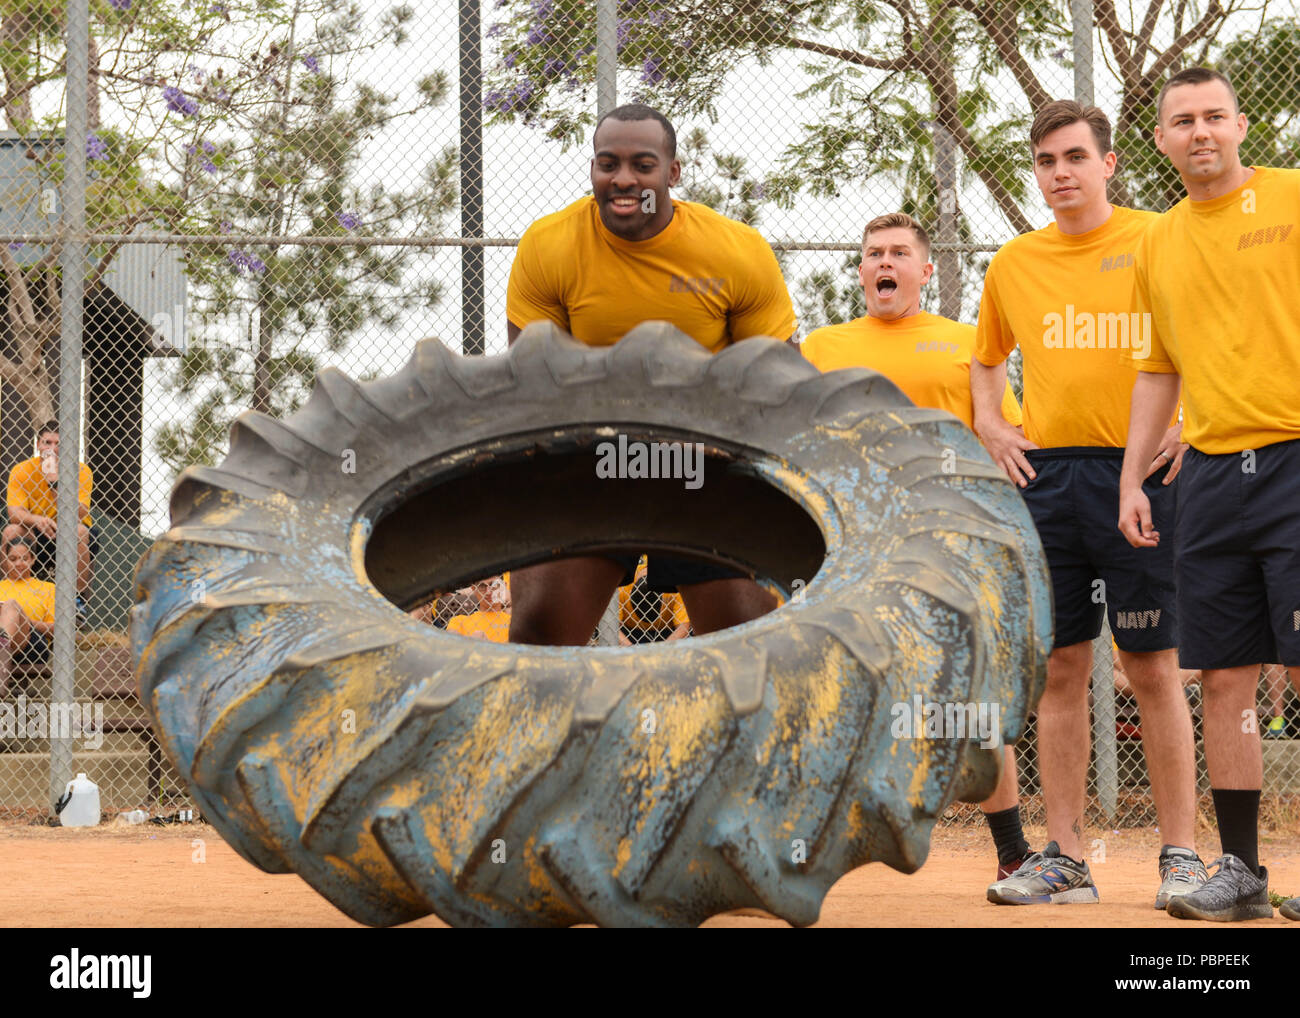 180720-N-PN275-1055 SAN DIEGO (July 20, 2018) Hospital Corpsman 2nd Class Trevor Tisby, center, flips a tire as part of Naval Medical Center San Diego’s Sailor Games, to observe the launch of Sailor 360. Sailor 360 is the Navy’s new leadership training curriculum, which is designed to provide meaningful training to Sailors of all ranks. (U.S. Navy Photo by Mass Communication Specialist 2nd Class Zach Kreitzer) Stock Photo